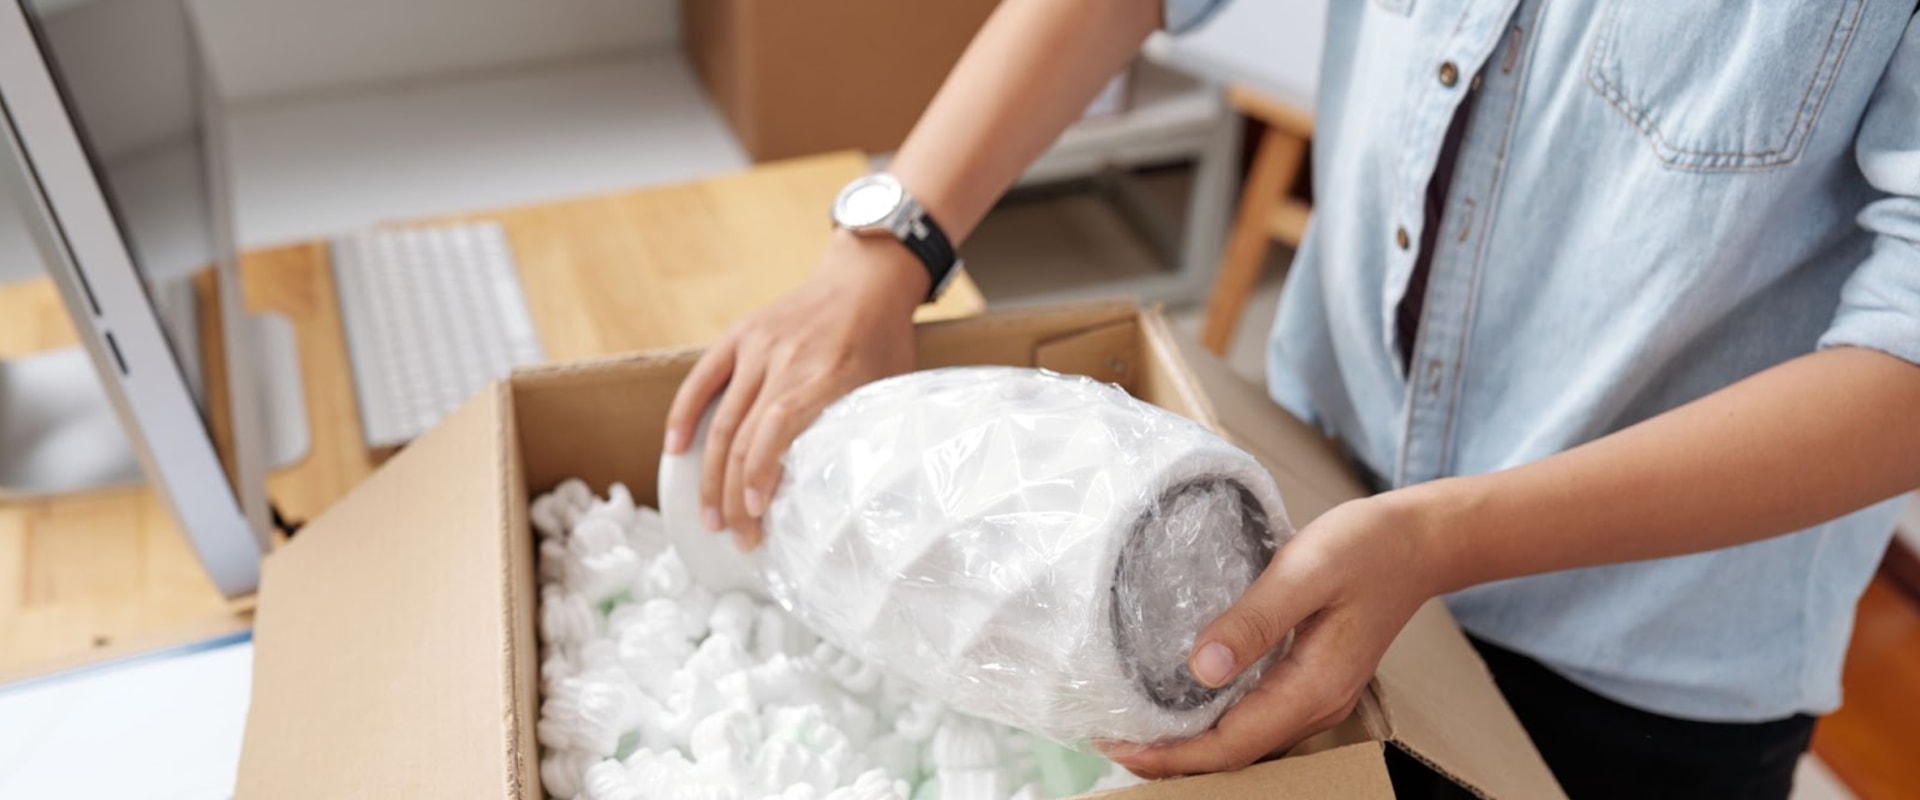 Properly Wrapping and Protecting Items: Essential Tips for Long Distance Movers